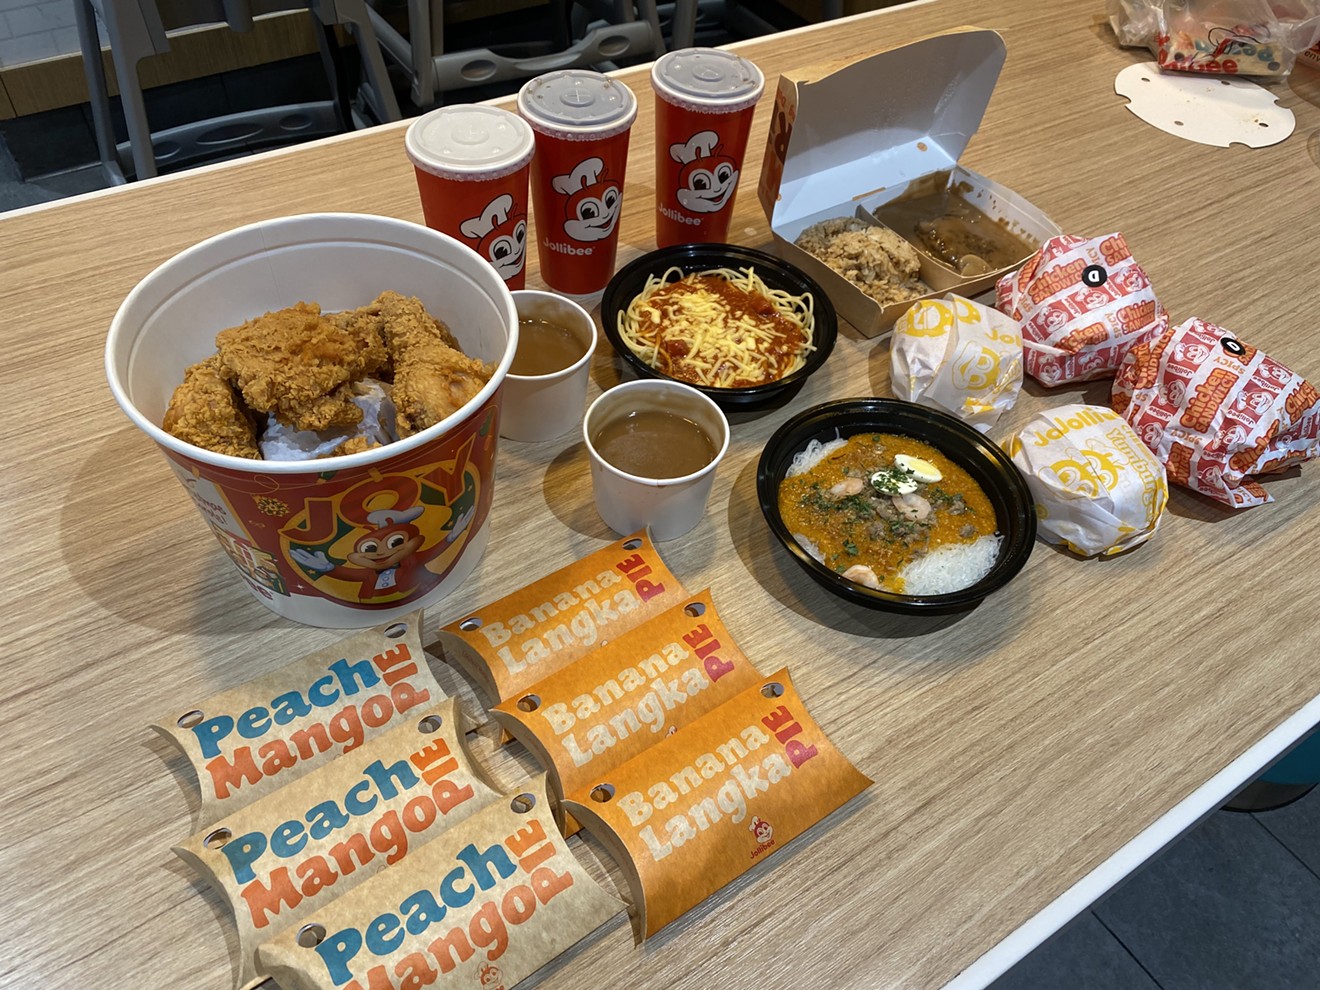 The full spread (just about) at Jollibee.